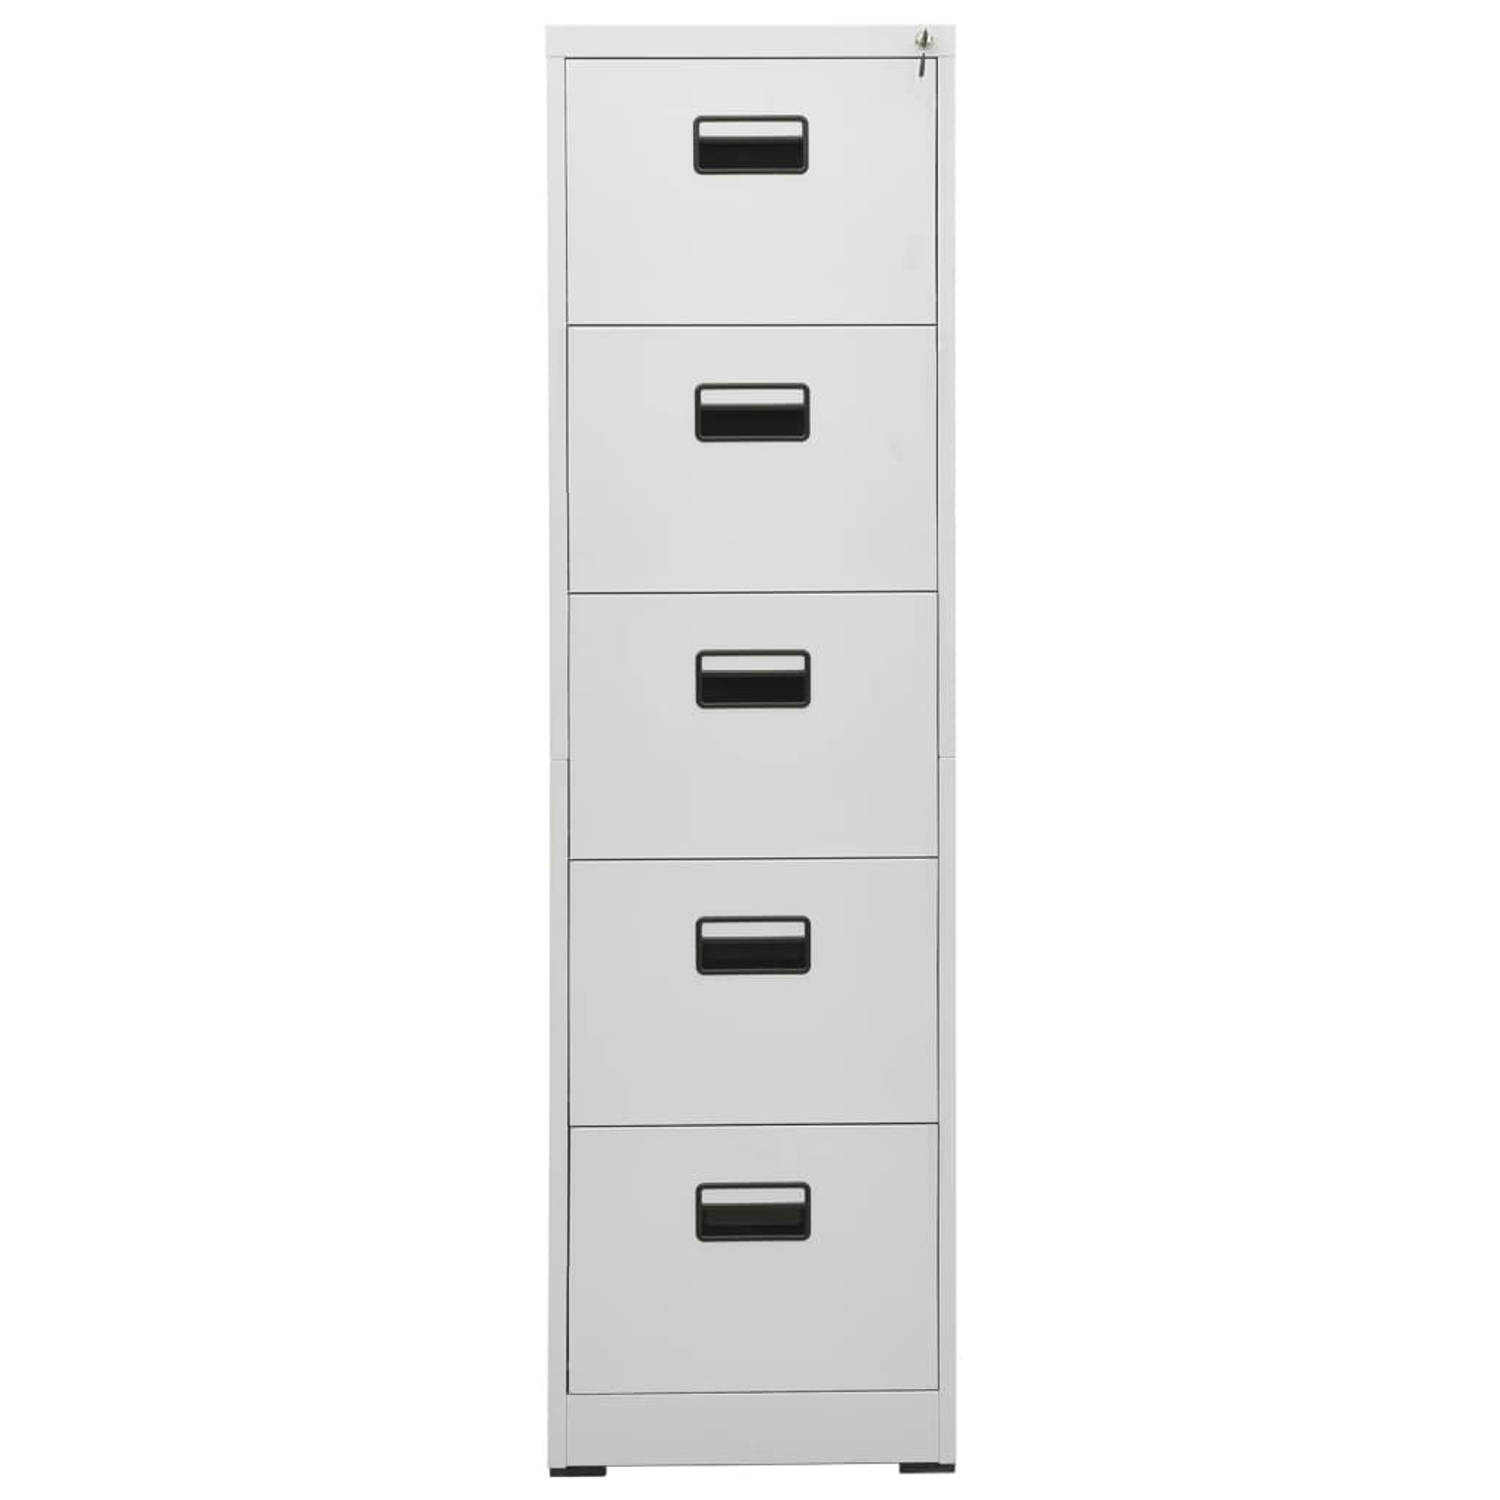 The Living Store Archiefkast - 46 x 62 x 164 cm - Staal - Lichtgrijs - 5 lades - Met slot